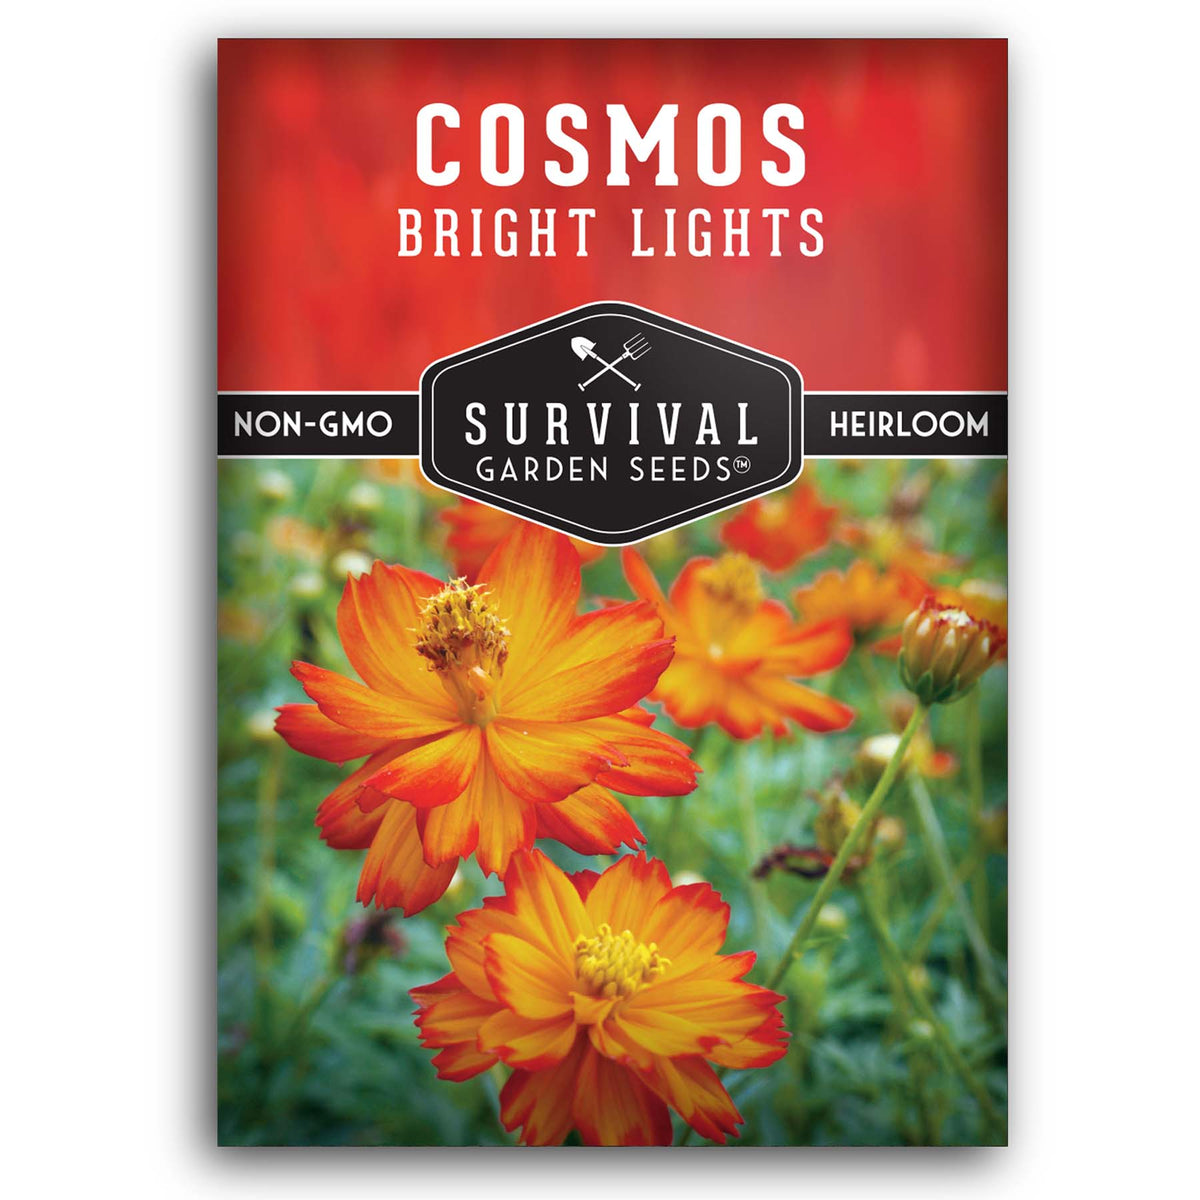 Bright Lights Cosmos seeds for planting